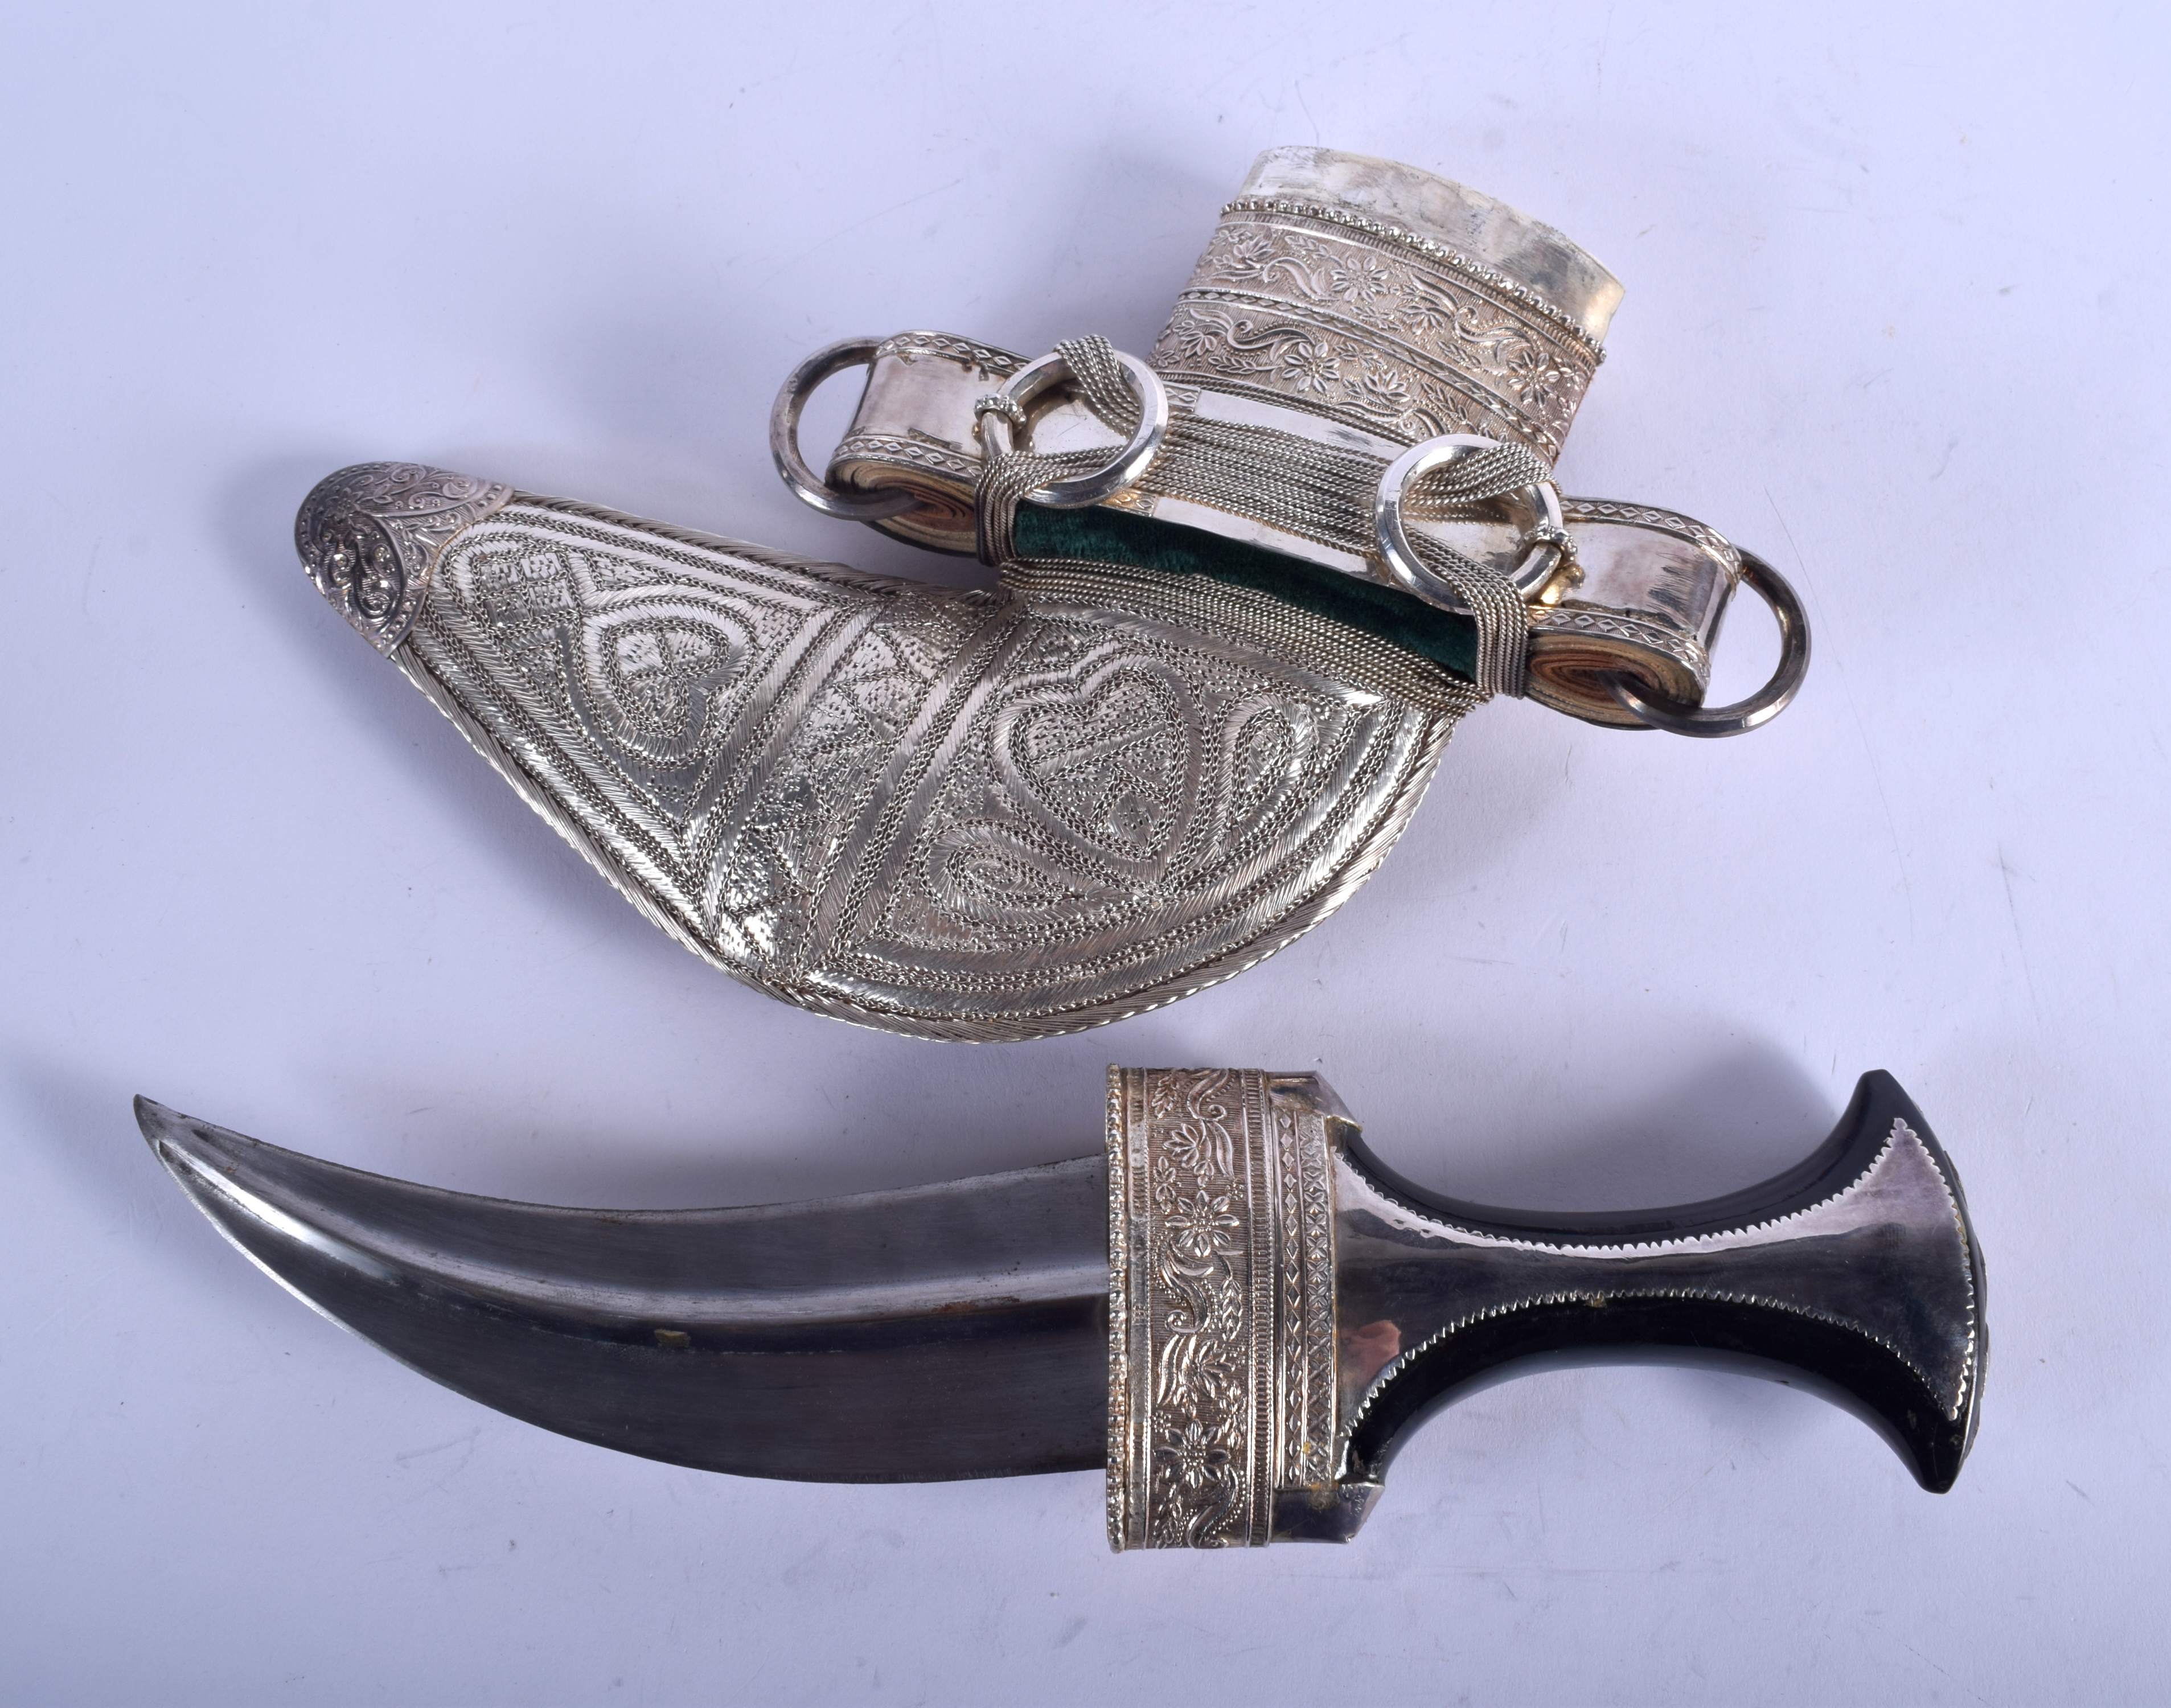 A BOXED EARLY 20TH CENTURY OMANI MIDDLE EASTERN WHITE METAL OVERLAID JAMBIYA DAGGER possibly with a - Image 2 of 3